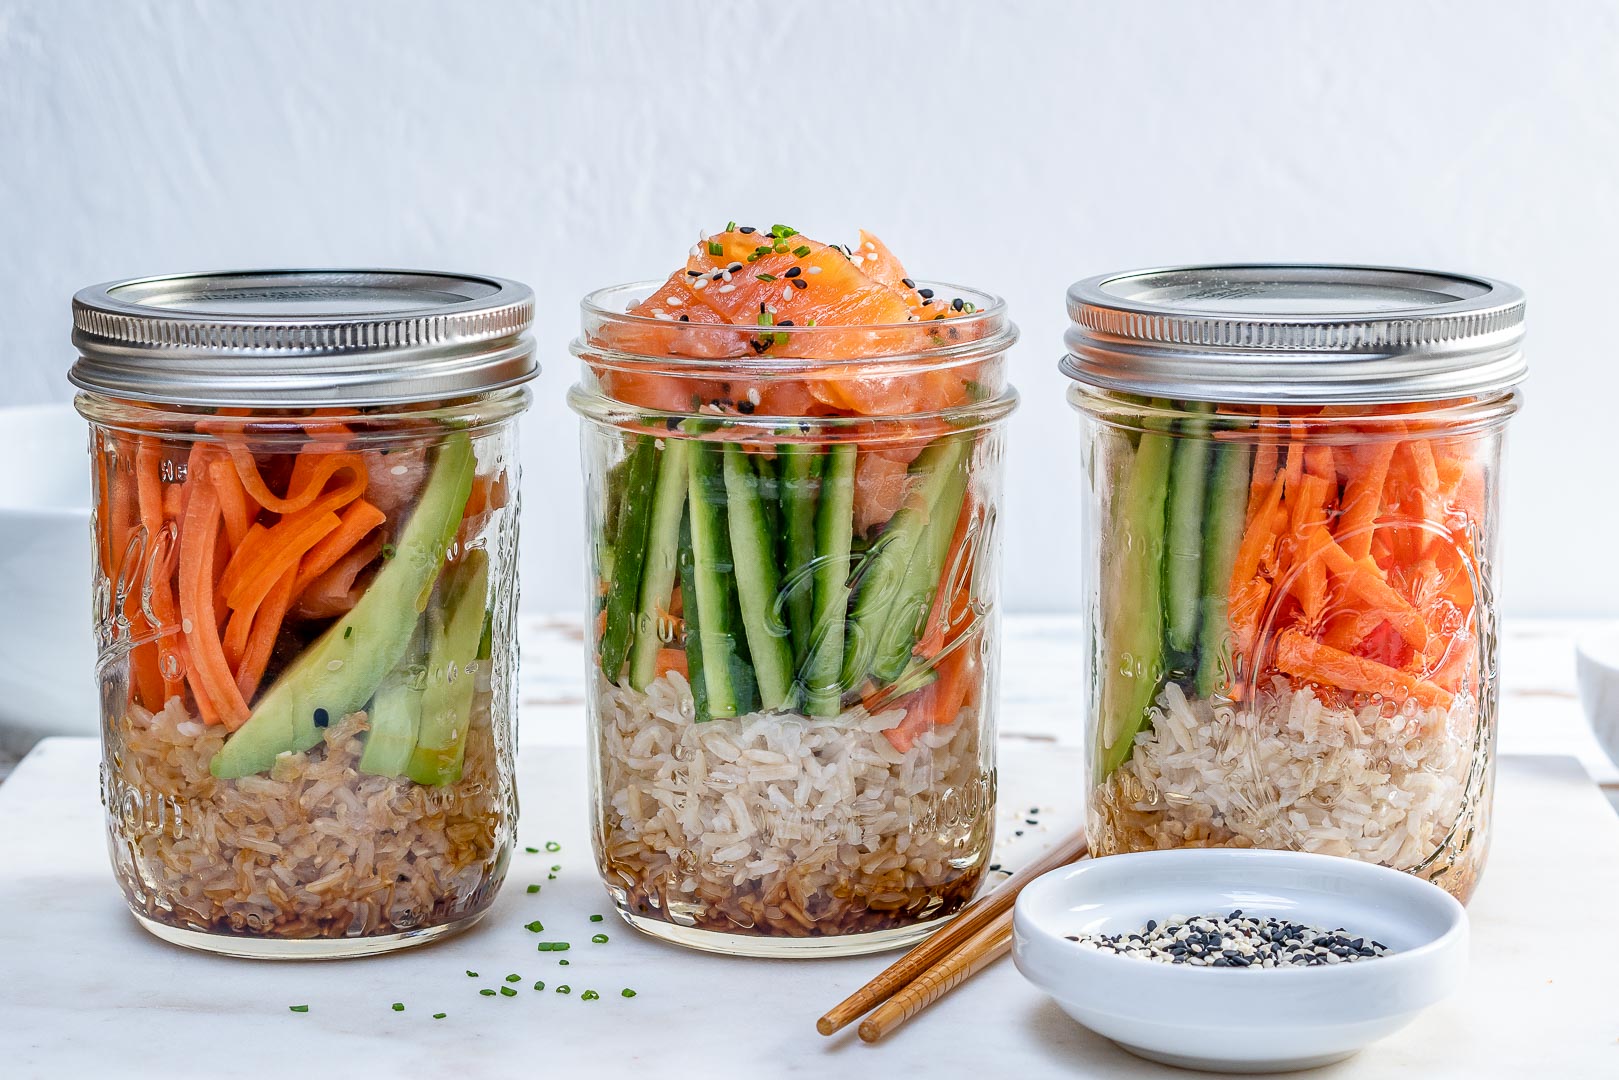 Sushi Mason Jars are Made to Prep Ahead for a Balanced Meal